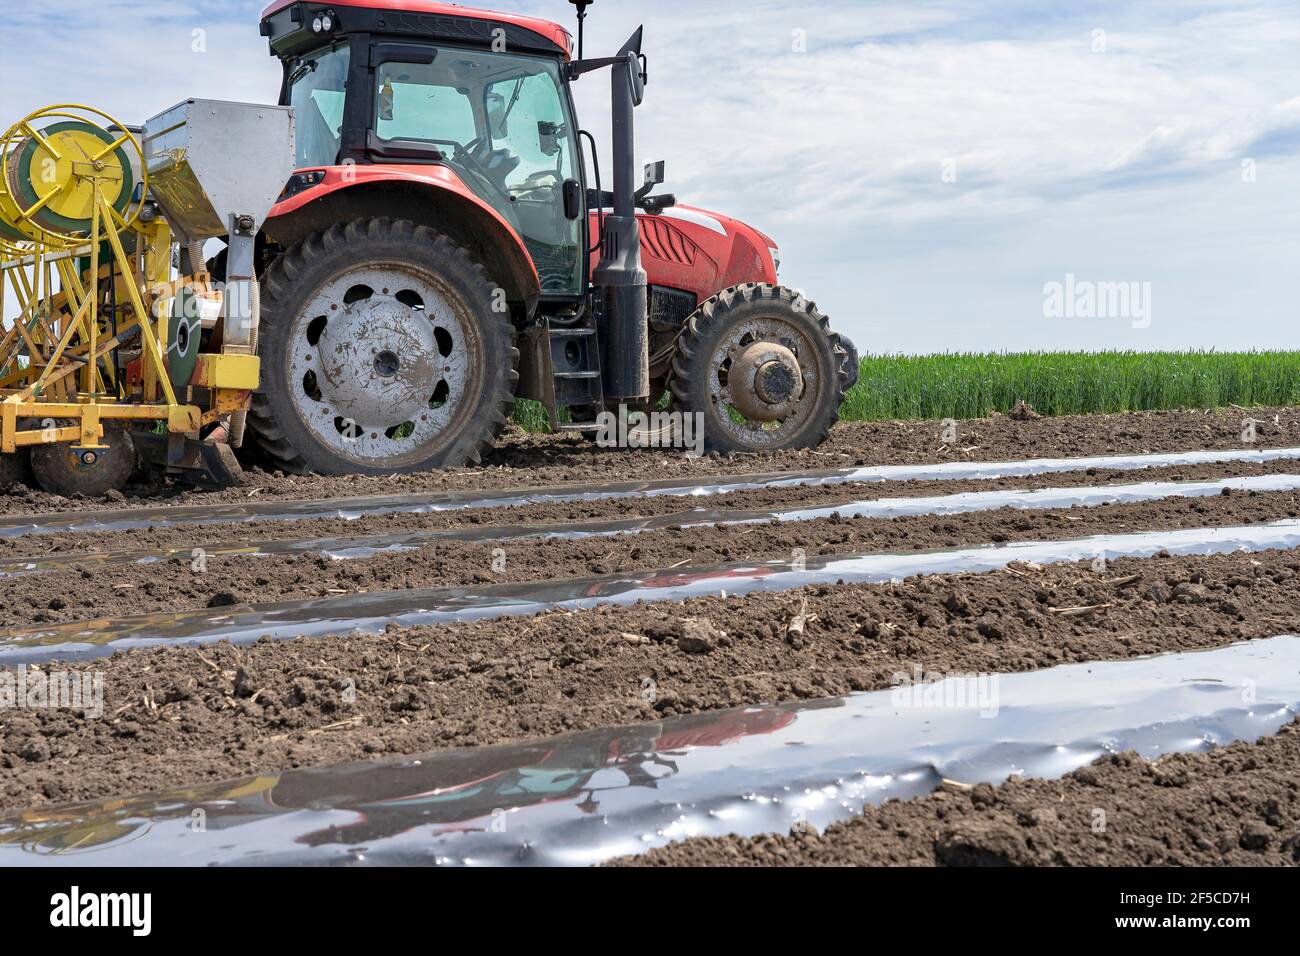 Tractor with agricultural equipment in the same pass dispenses fertilizer, lays down irrigation lines and rolls out a continuous of mulch plastic. Stock Photo